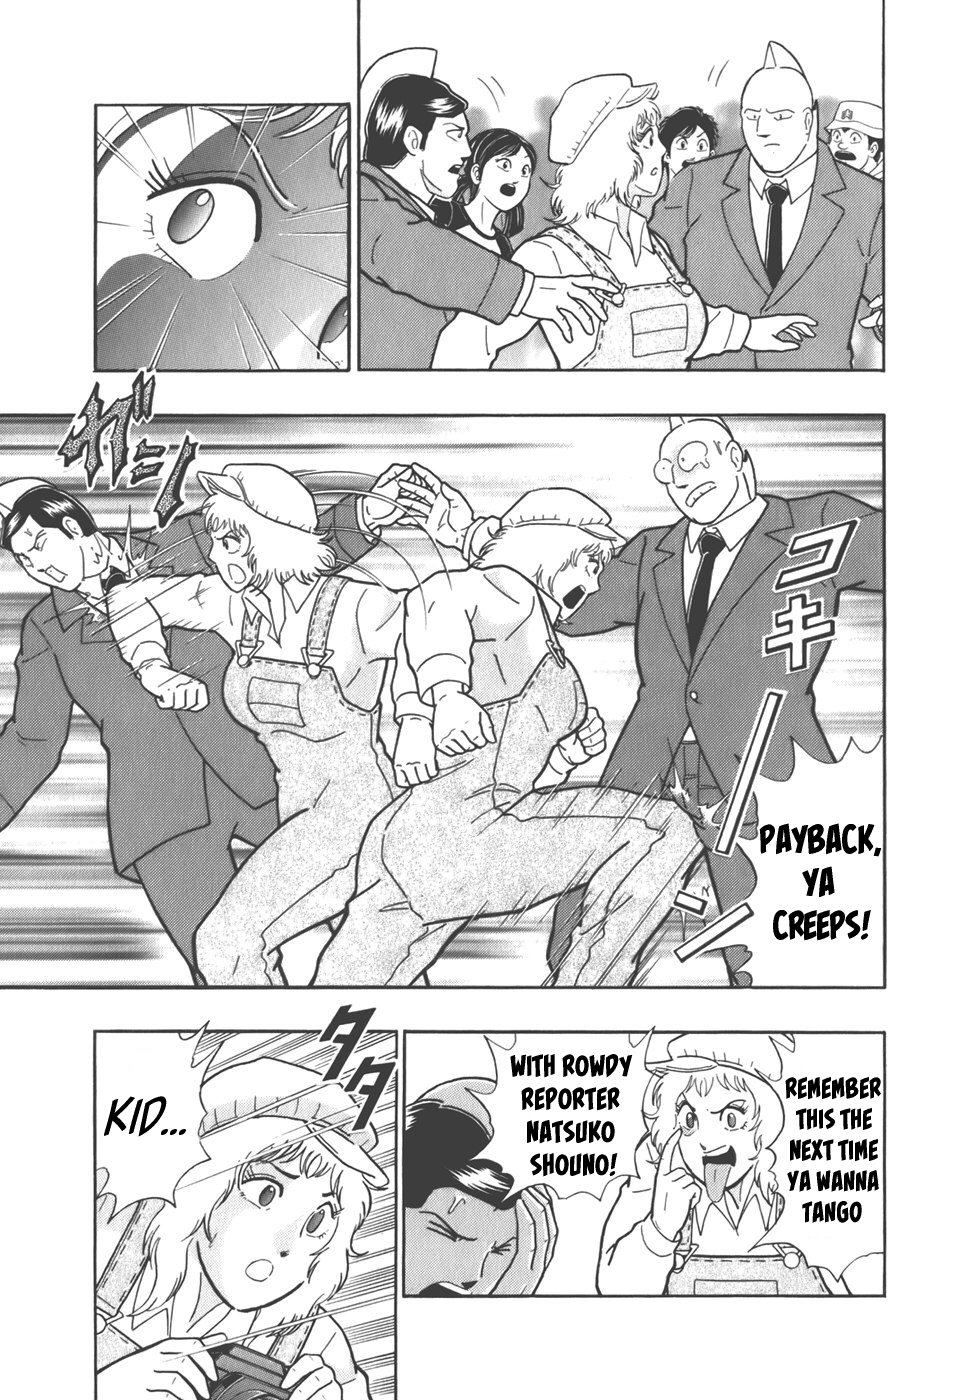 Kinnikuman Nisei: Ultimate Chojin Tag Vol. 4 Ch. 38 Win the Free for all With "The Ultimate Finisher"!